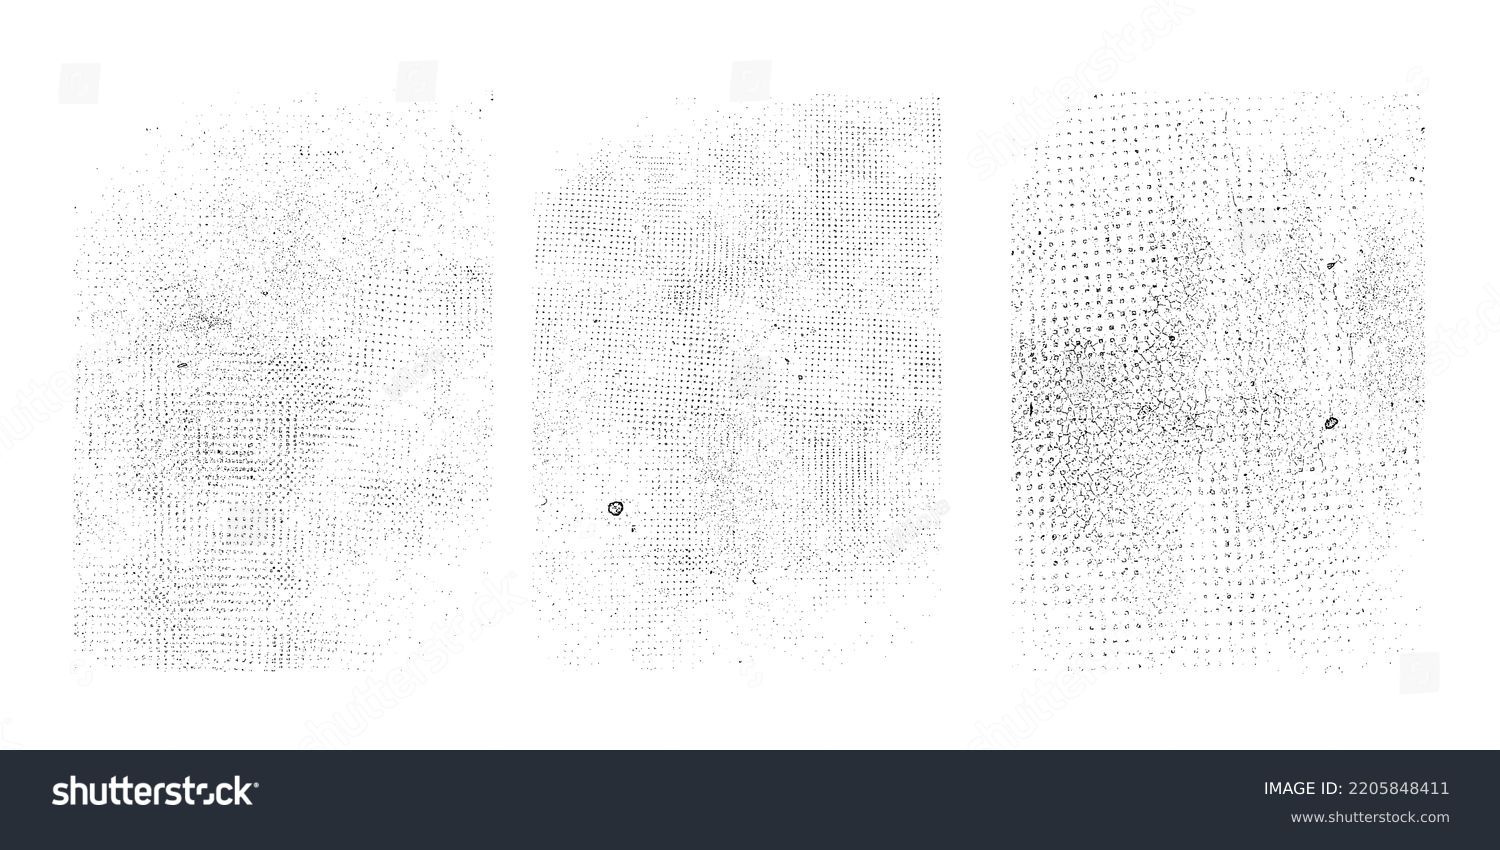 Grunge Urban Backgrounds set.Texture Vector.Dust Overlay Distress Grain ,Simply Place illustration over any Object to Create grungy Effect .abstract,splattered , dirty, texture for your design.  #2205848411